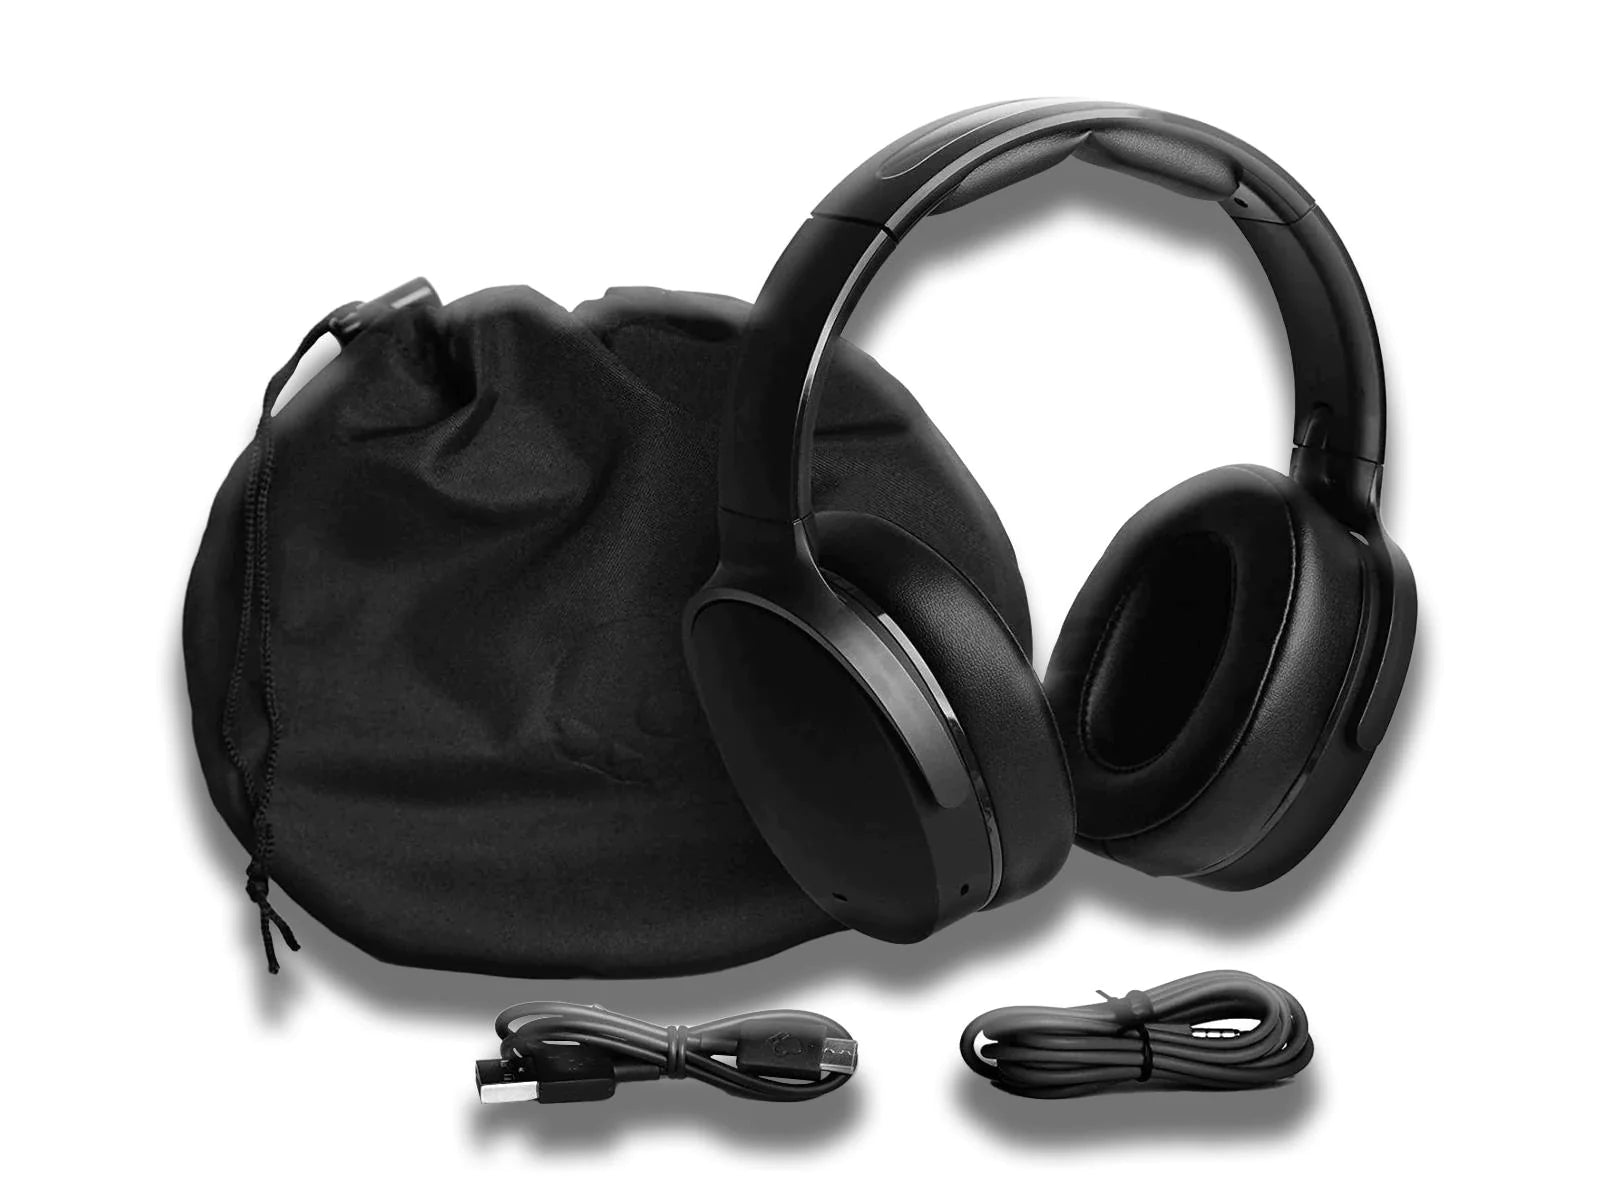 Image-showing-case-bag-data-cable-audio-jack-cable-and-skullcandy-hesh-anc-headphones-on-the-white-background